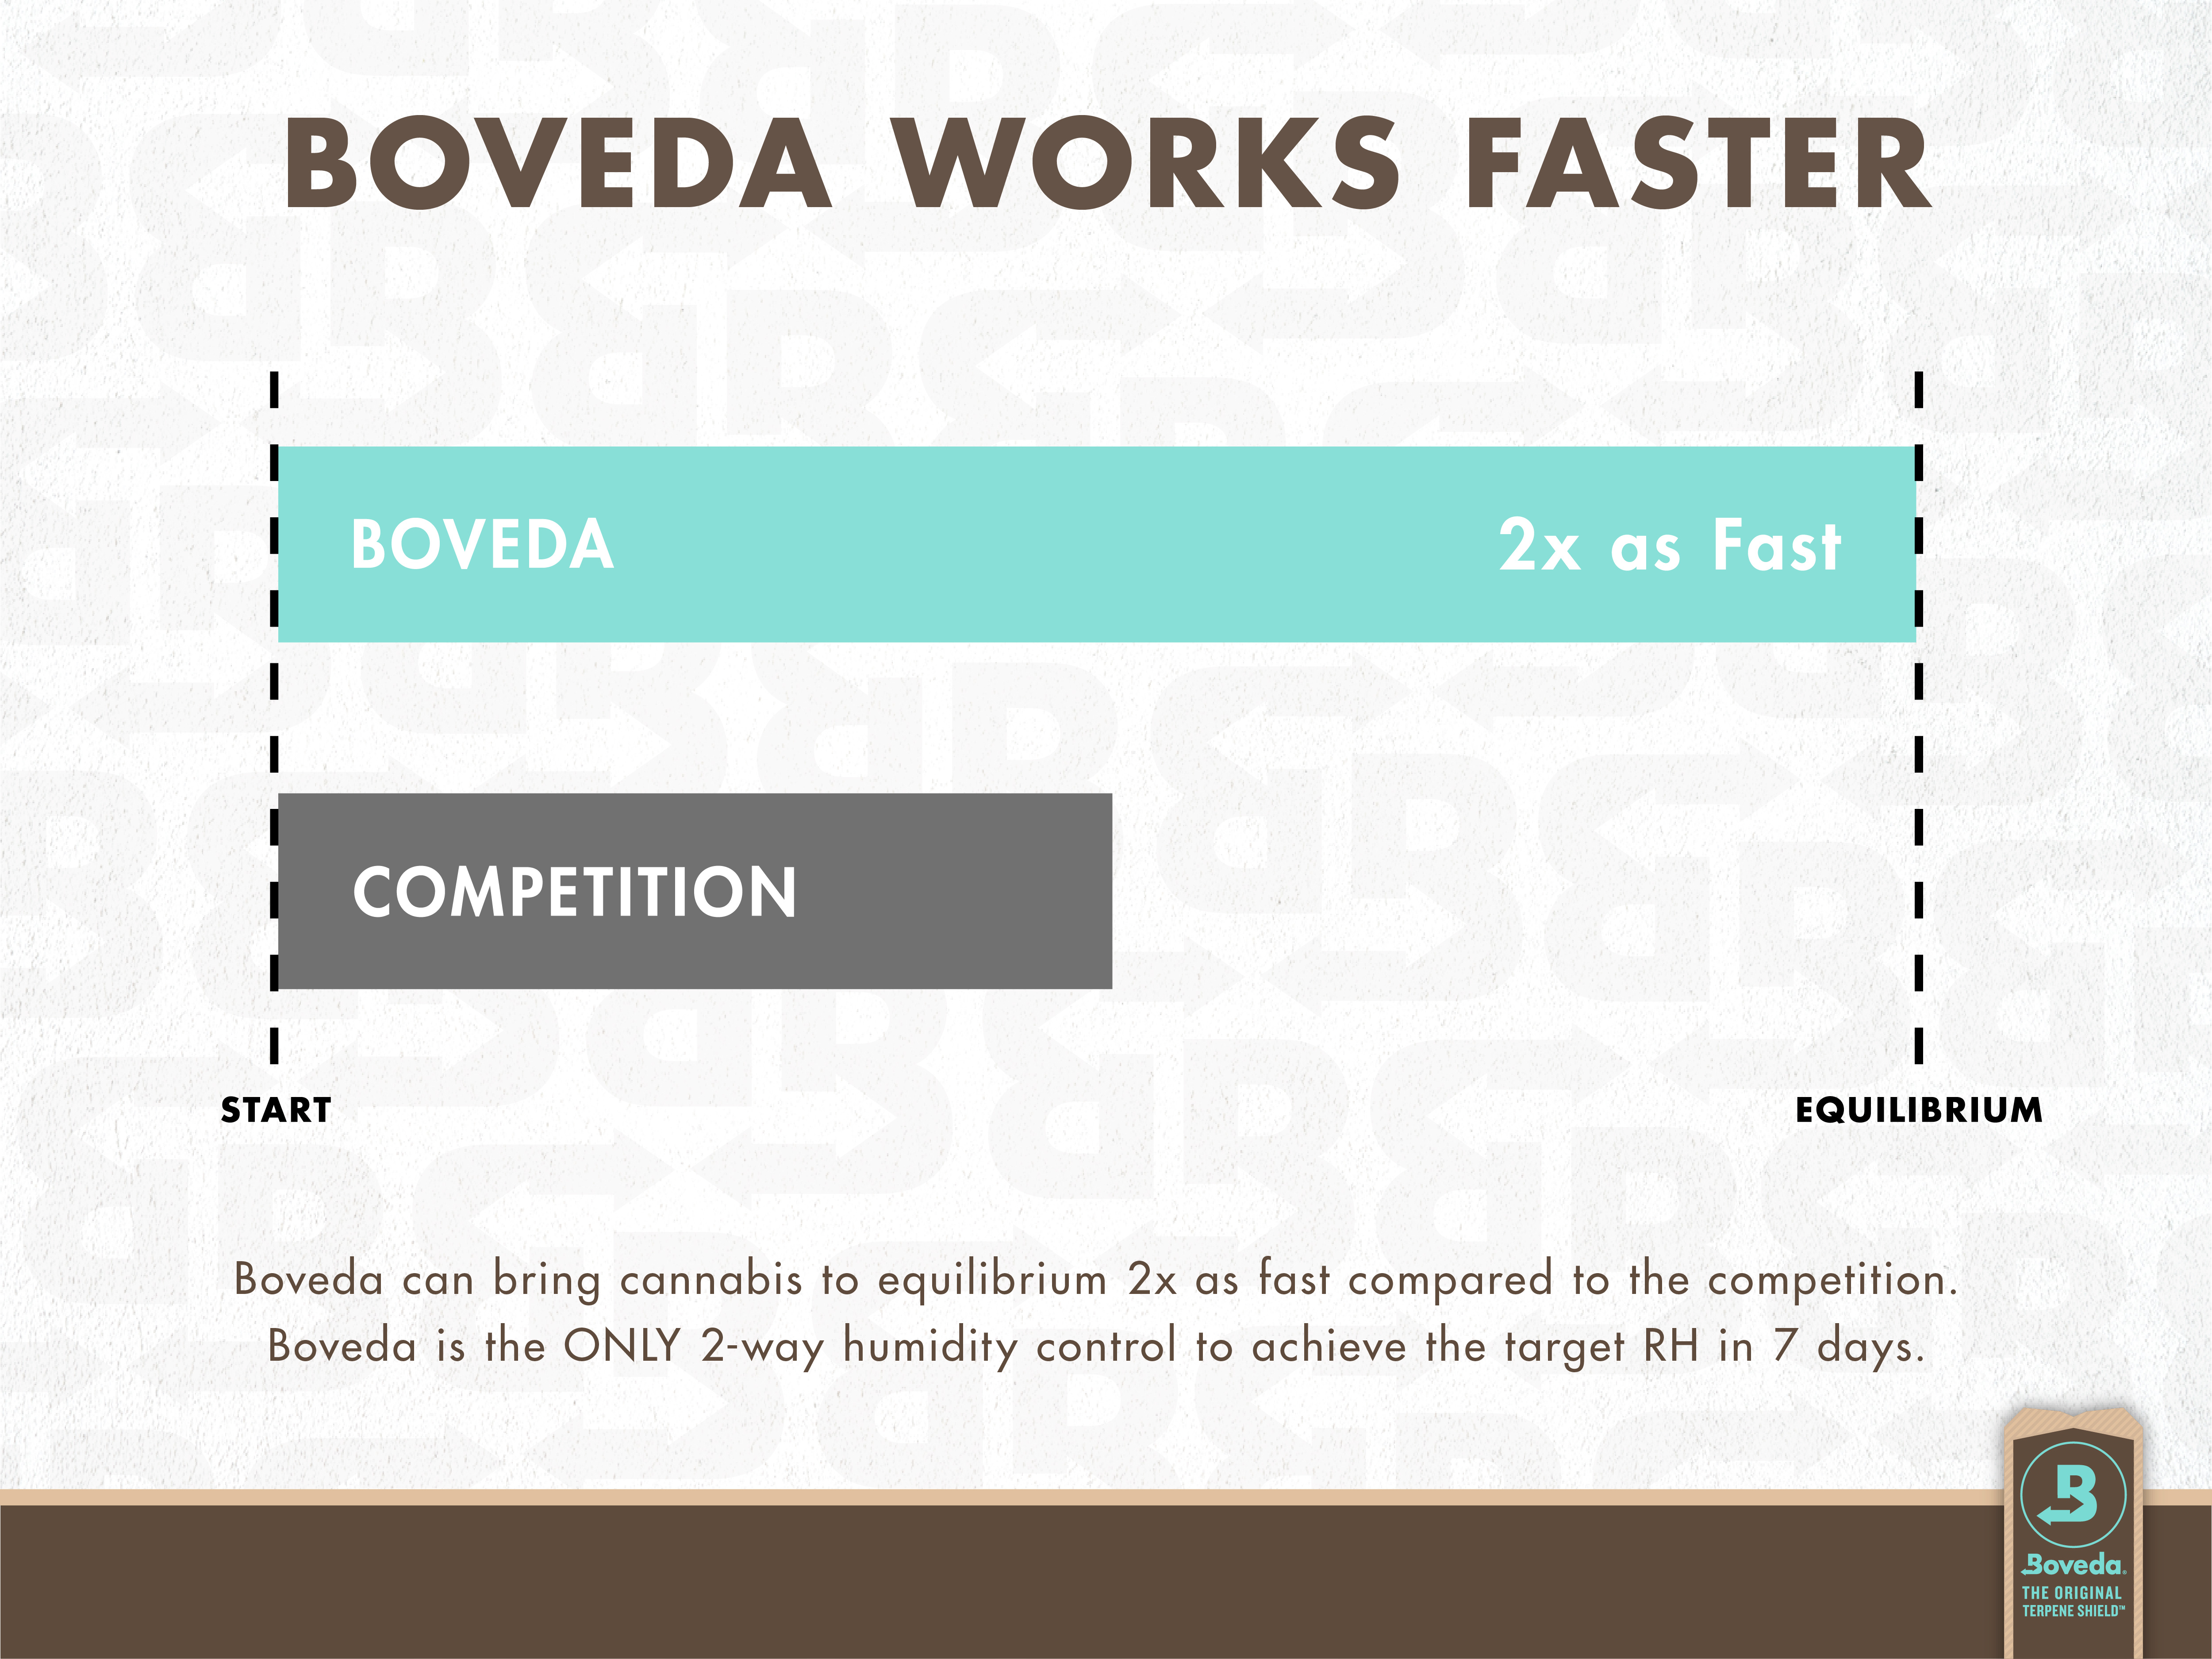 Boveda works faster. Boveda can bring cannabis to equilibrium two times as fast compared to the competition. 